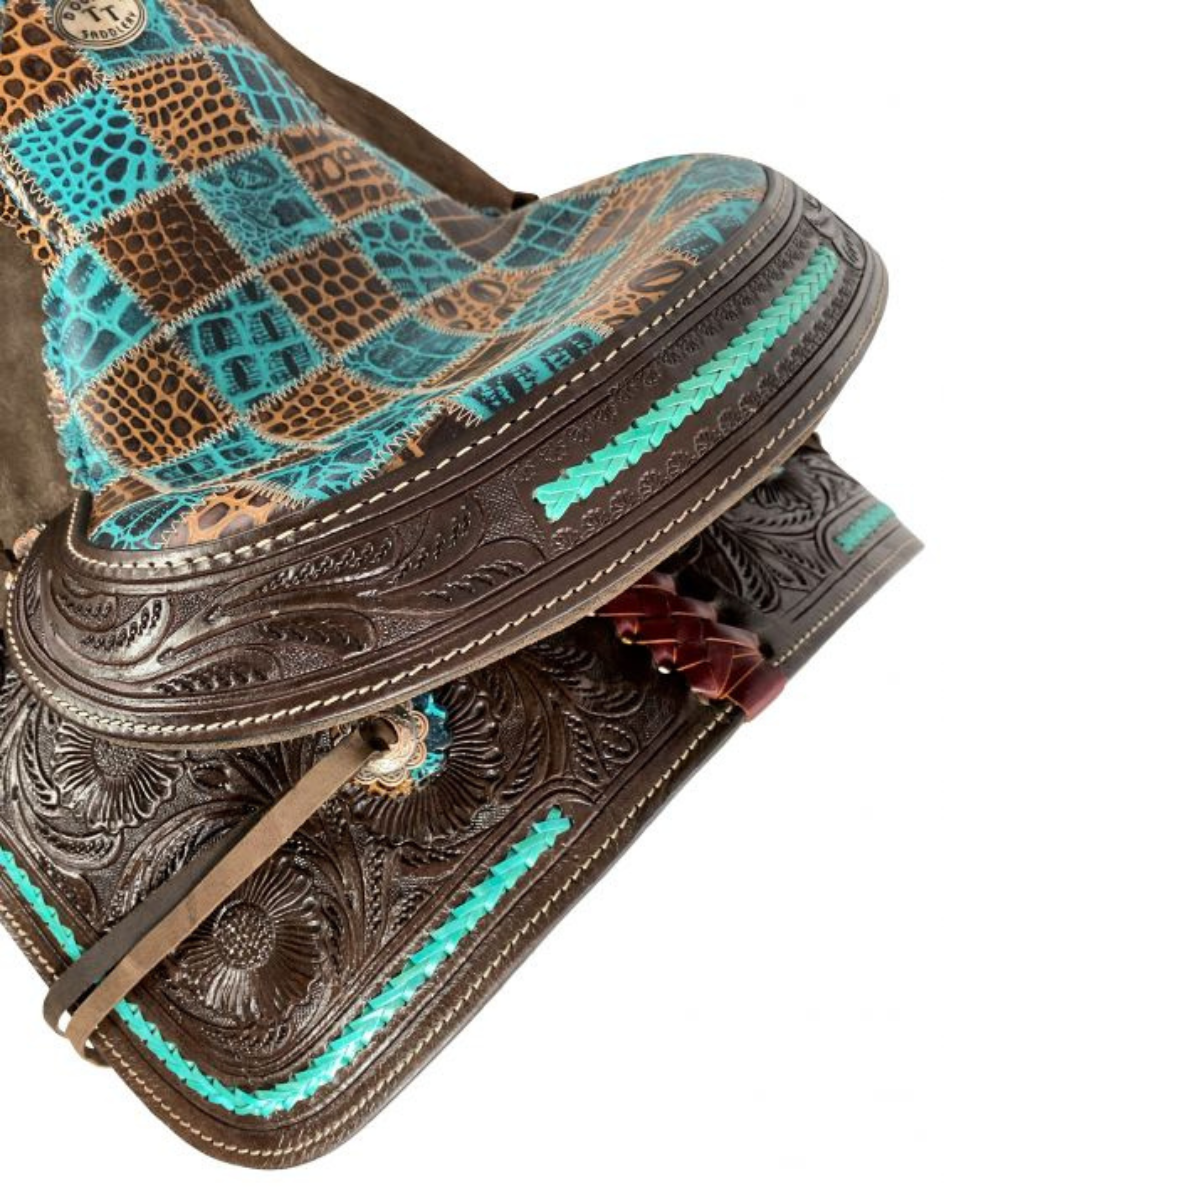 15" Double T  Barrel style saddle with teal gator patchwork pattern - Double T Saddles